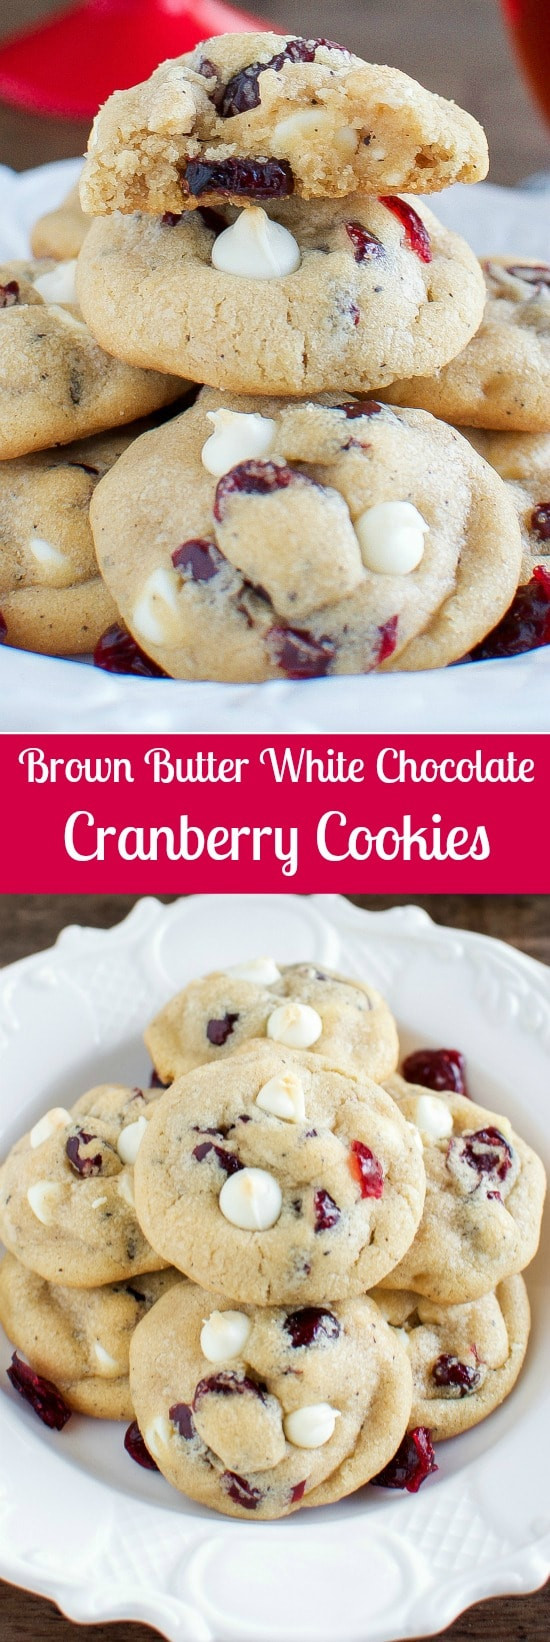 White Chocolate Christmas Cookies
 Best White Chocolate Cranberry Cookies Back for Seconds